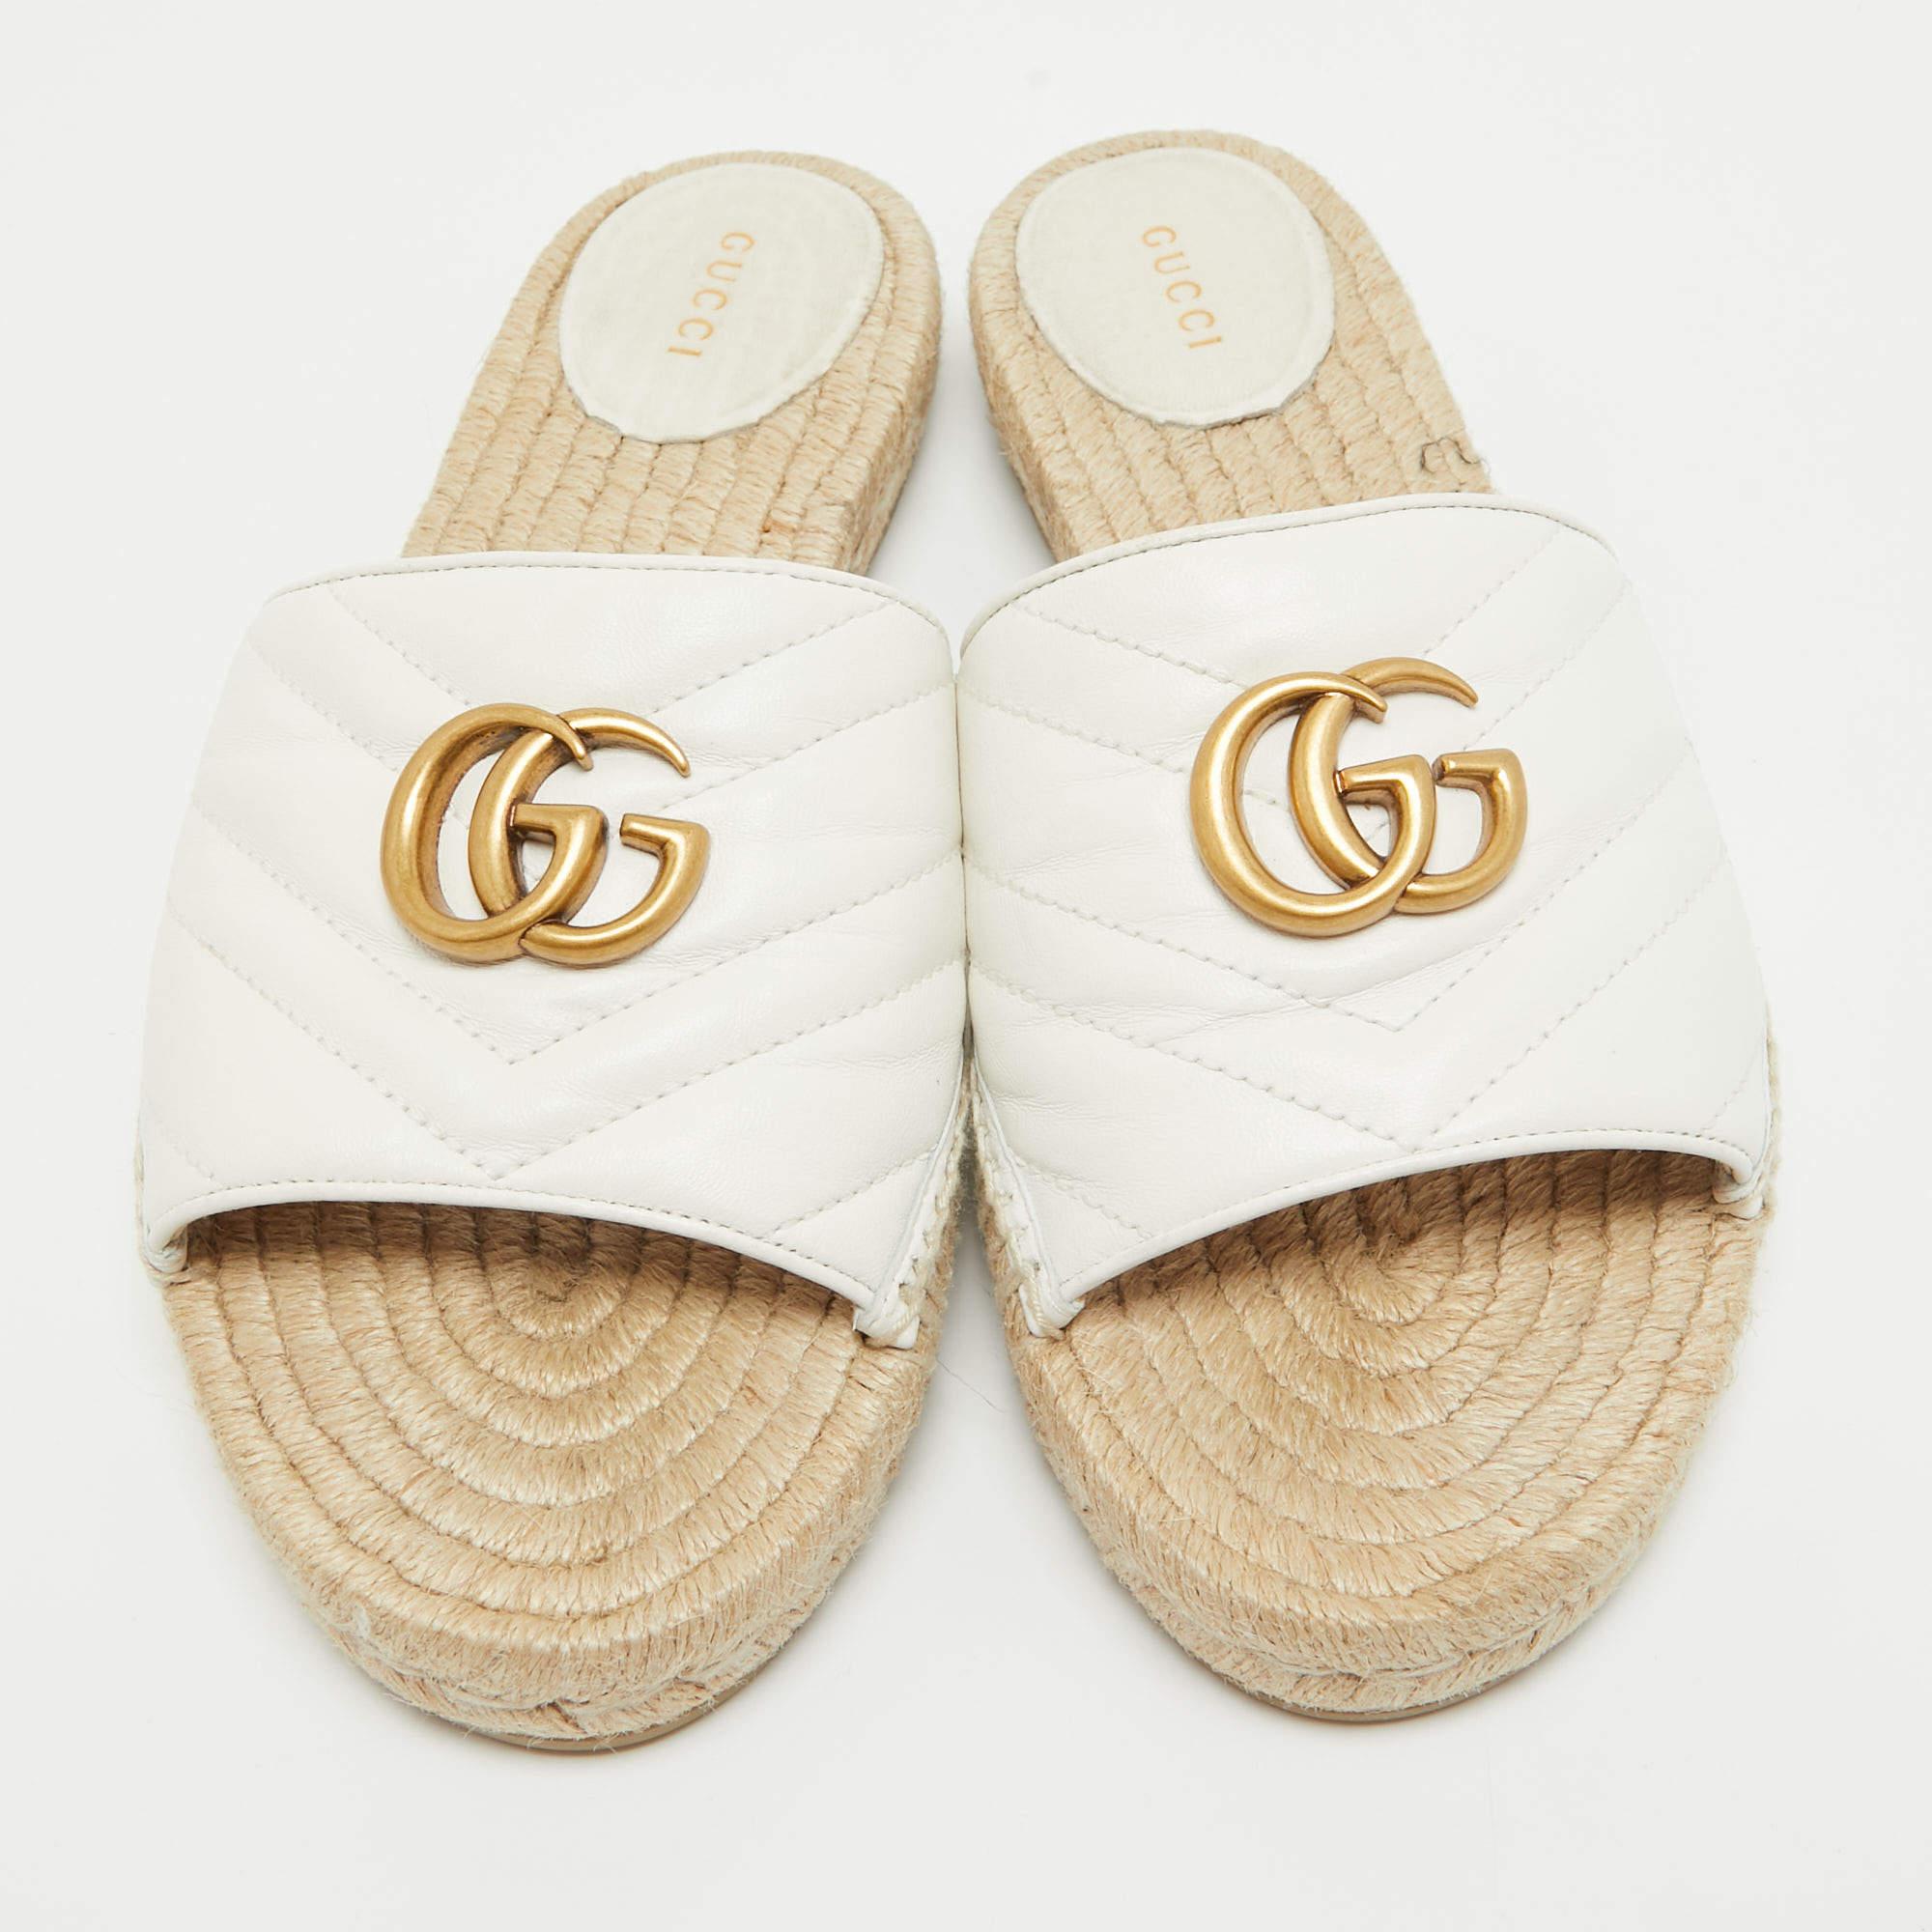 Frame your feet with these Gucci Marmont espadrille flats. Created using the best materials, the flats are perfect with short, midi, and maxi hemlines.

